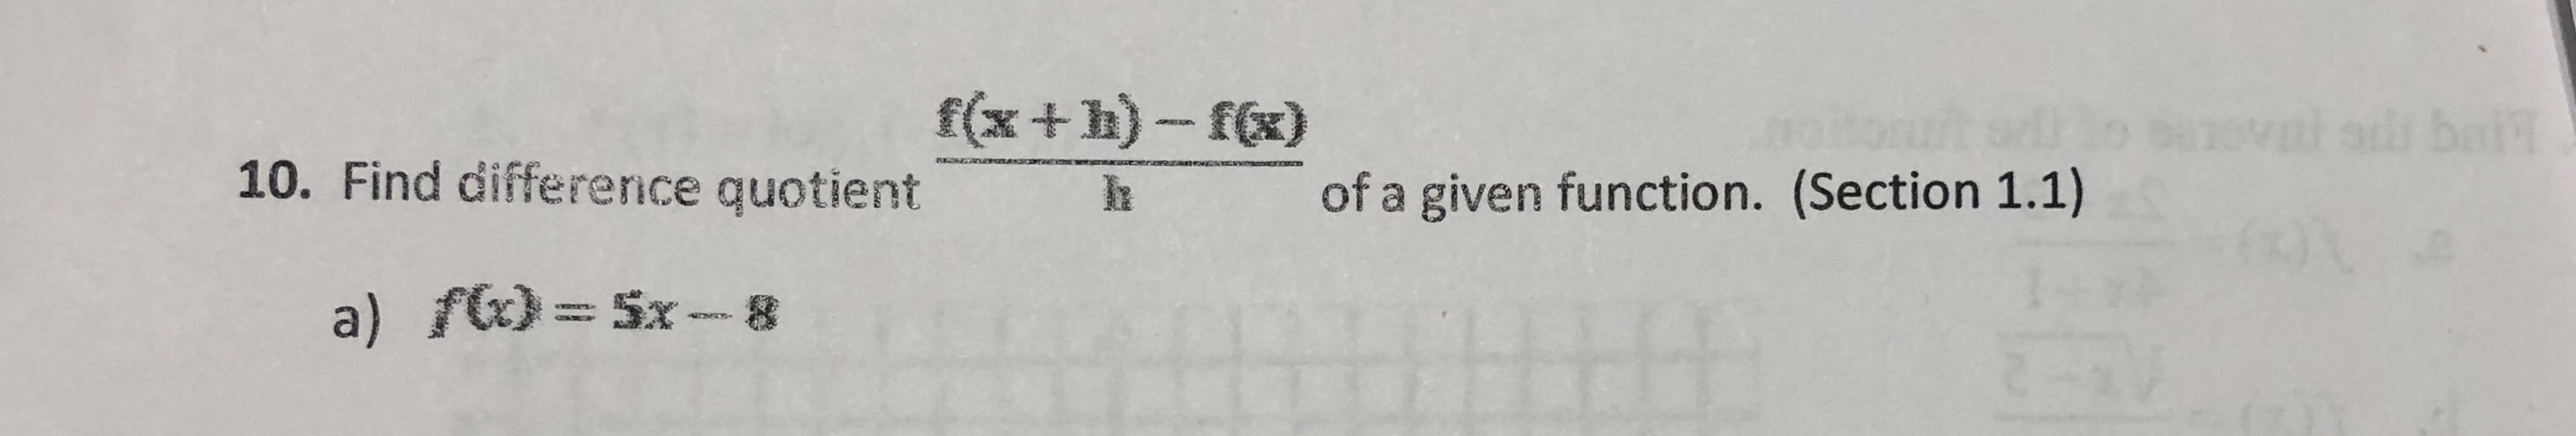 f(x+h)- f(x)
evni odi bai
onth
of a given function. (Section 1.1)
10. Find difference quotient
a) f = 5x - 8
